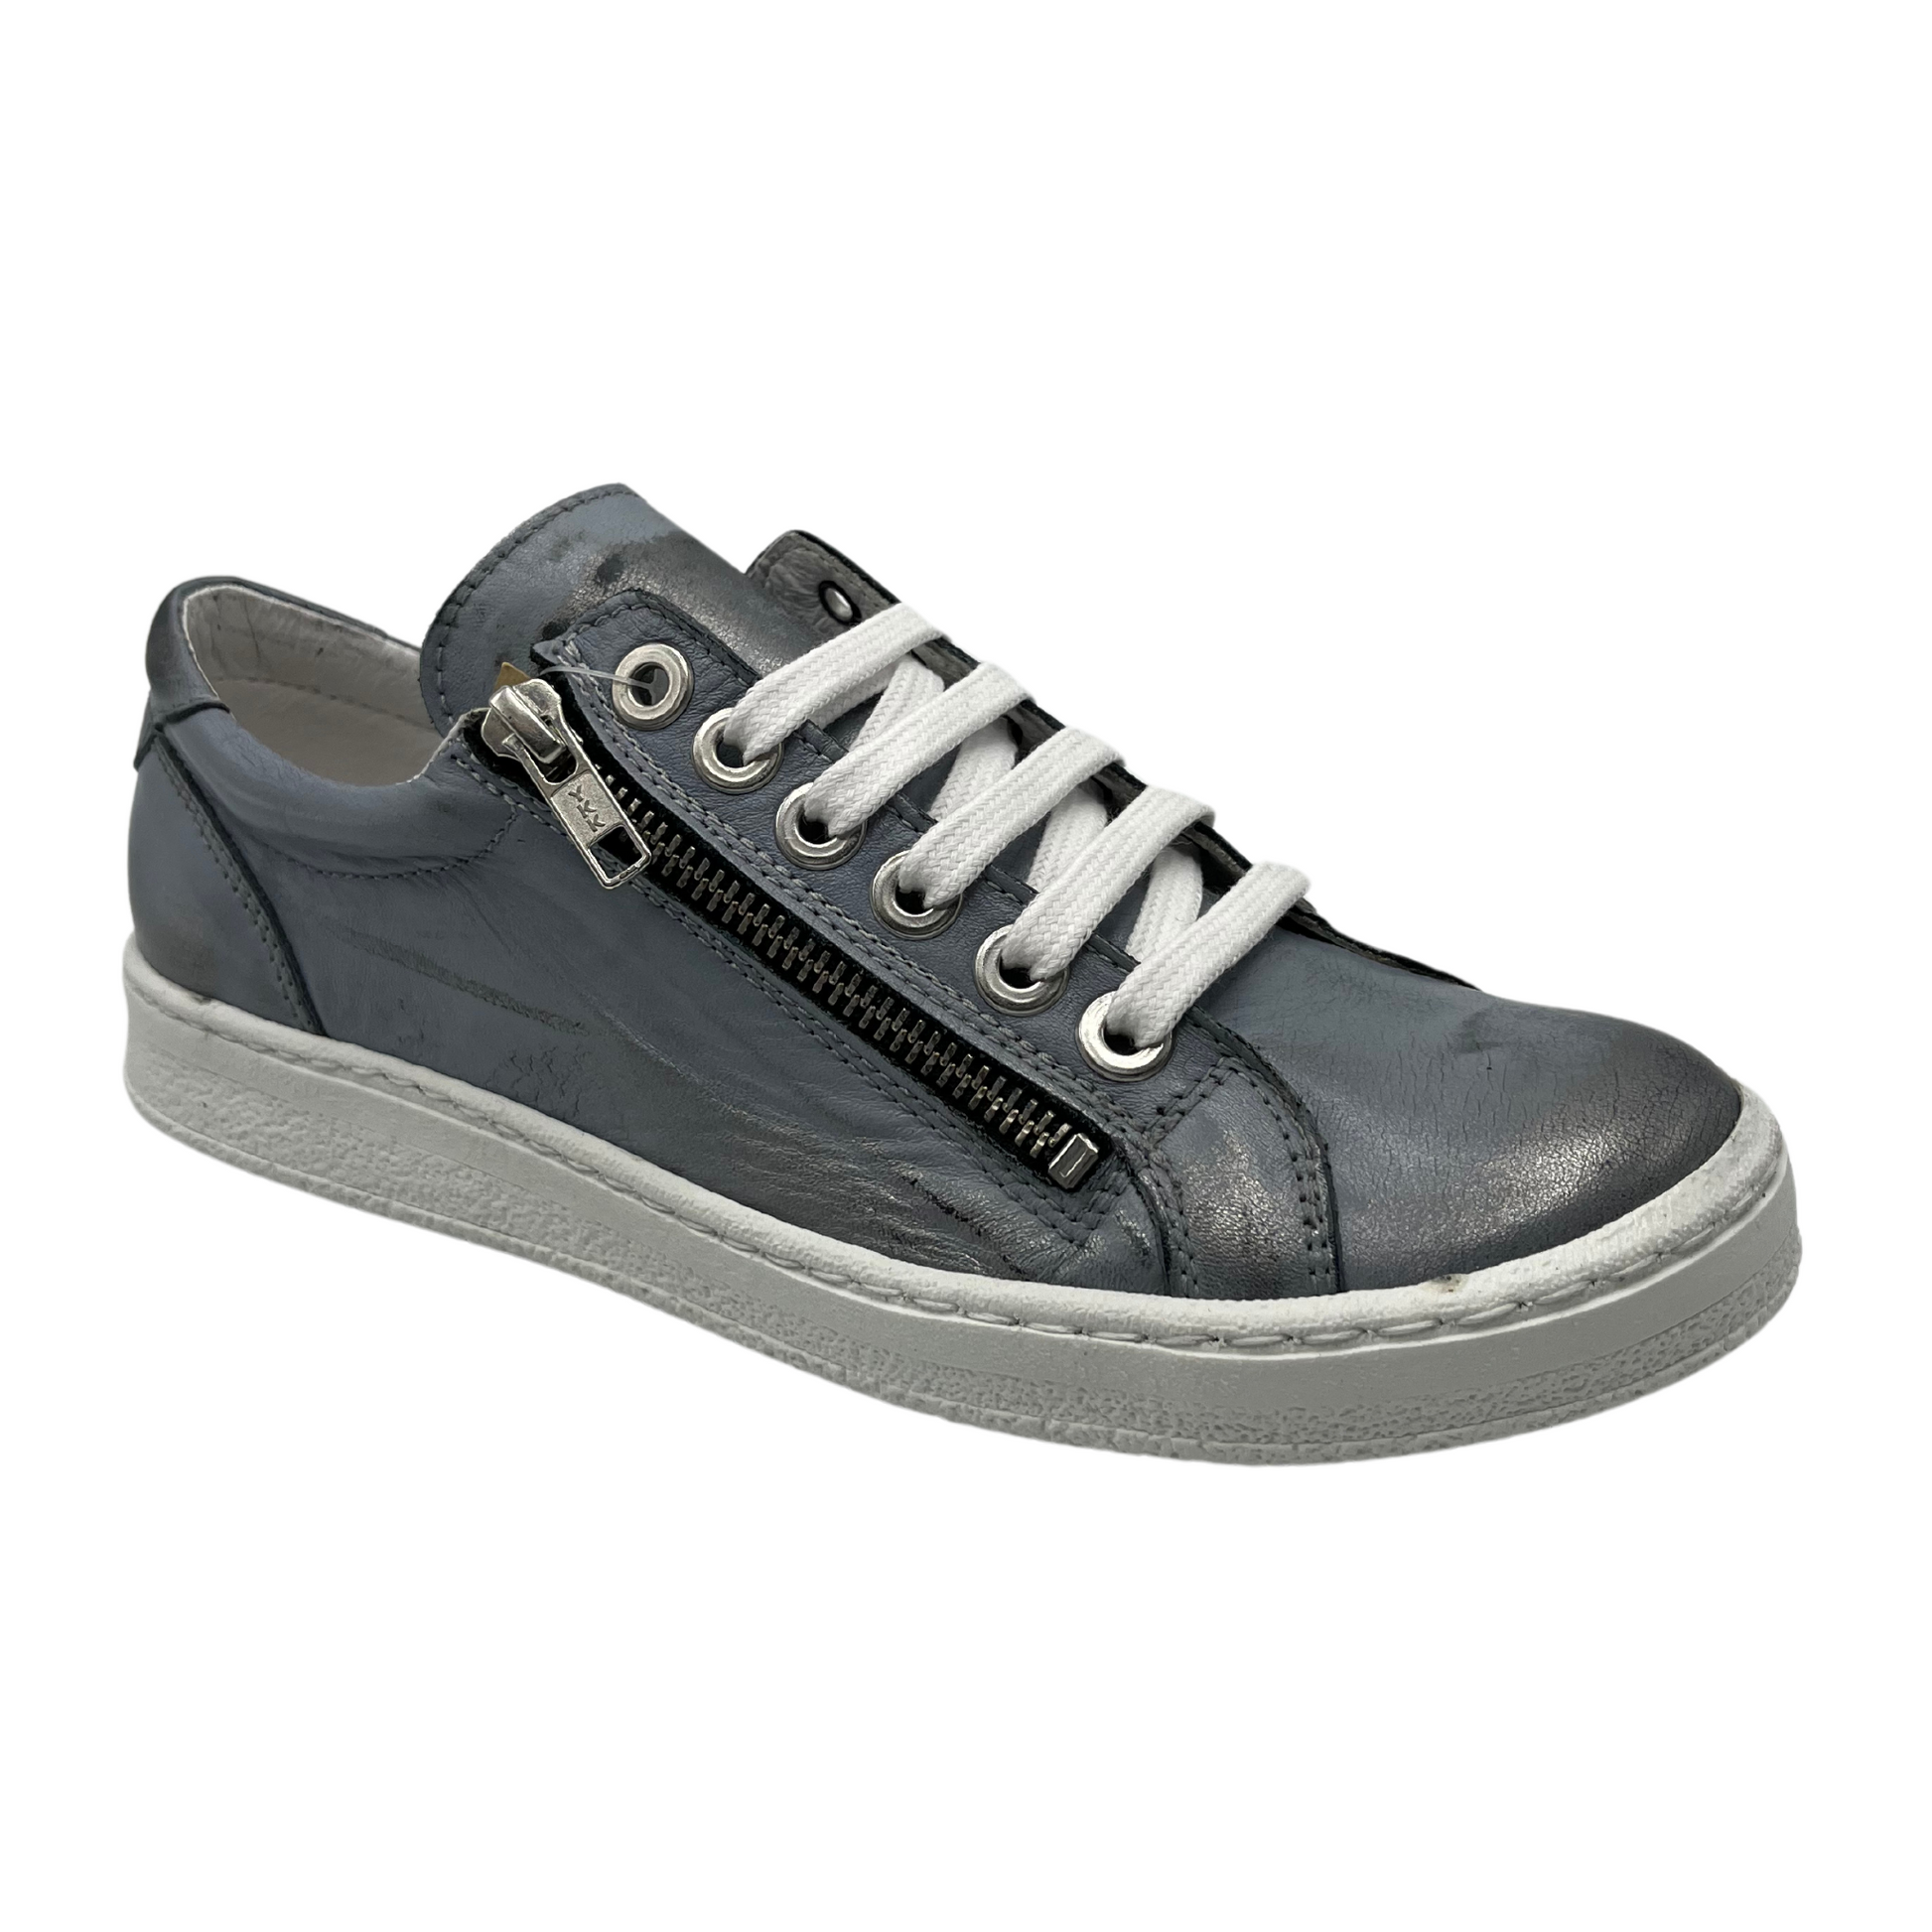 45 degree angled view of metallic silver leather sneaker with white laces and side zipper closure